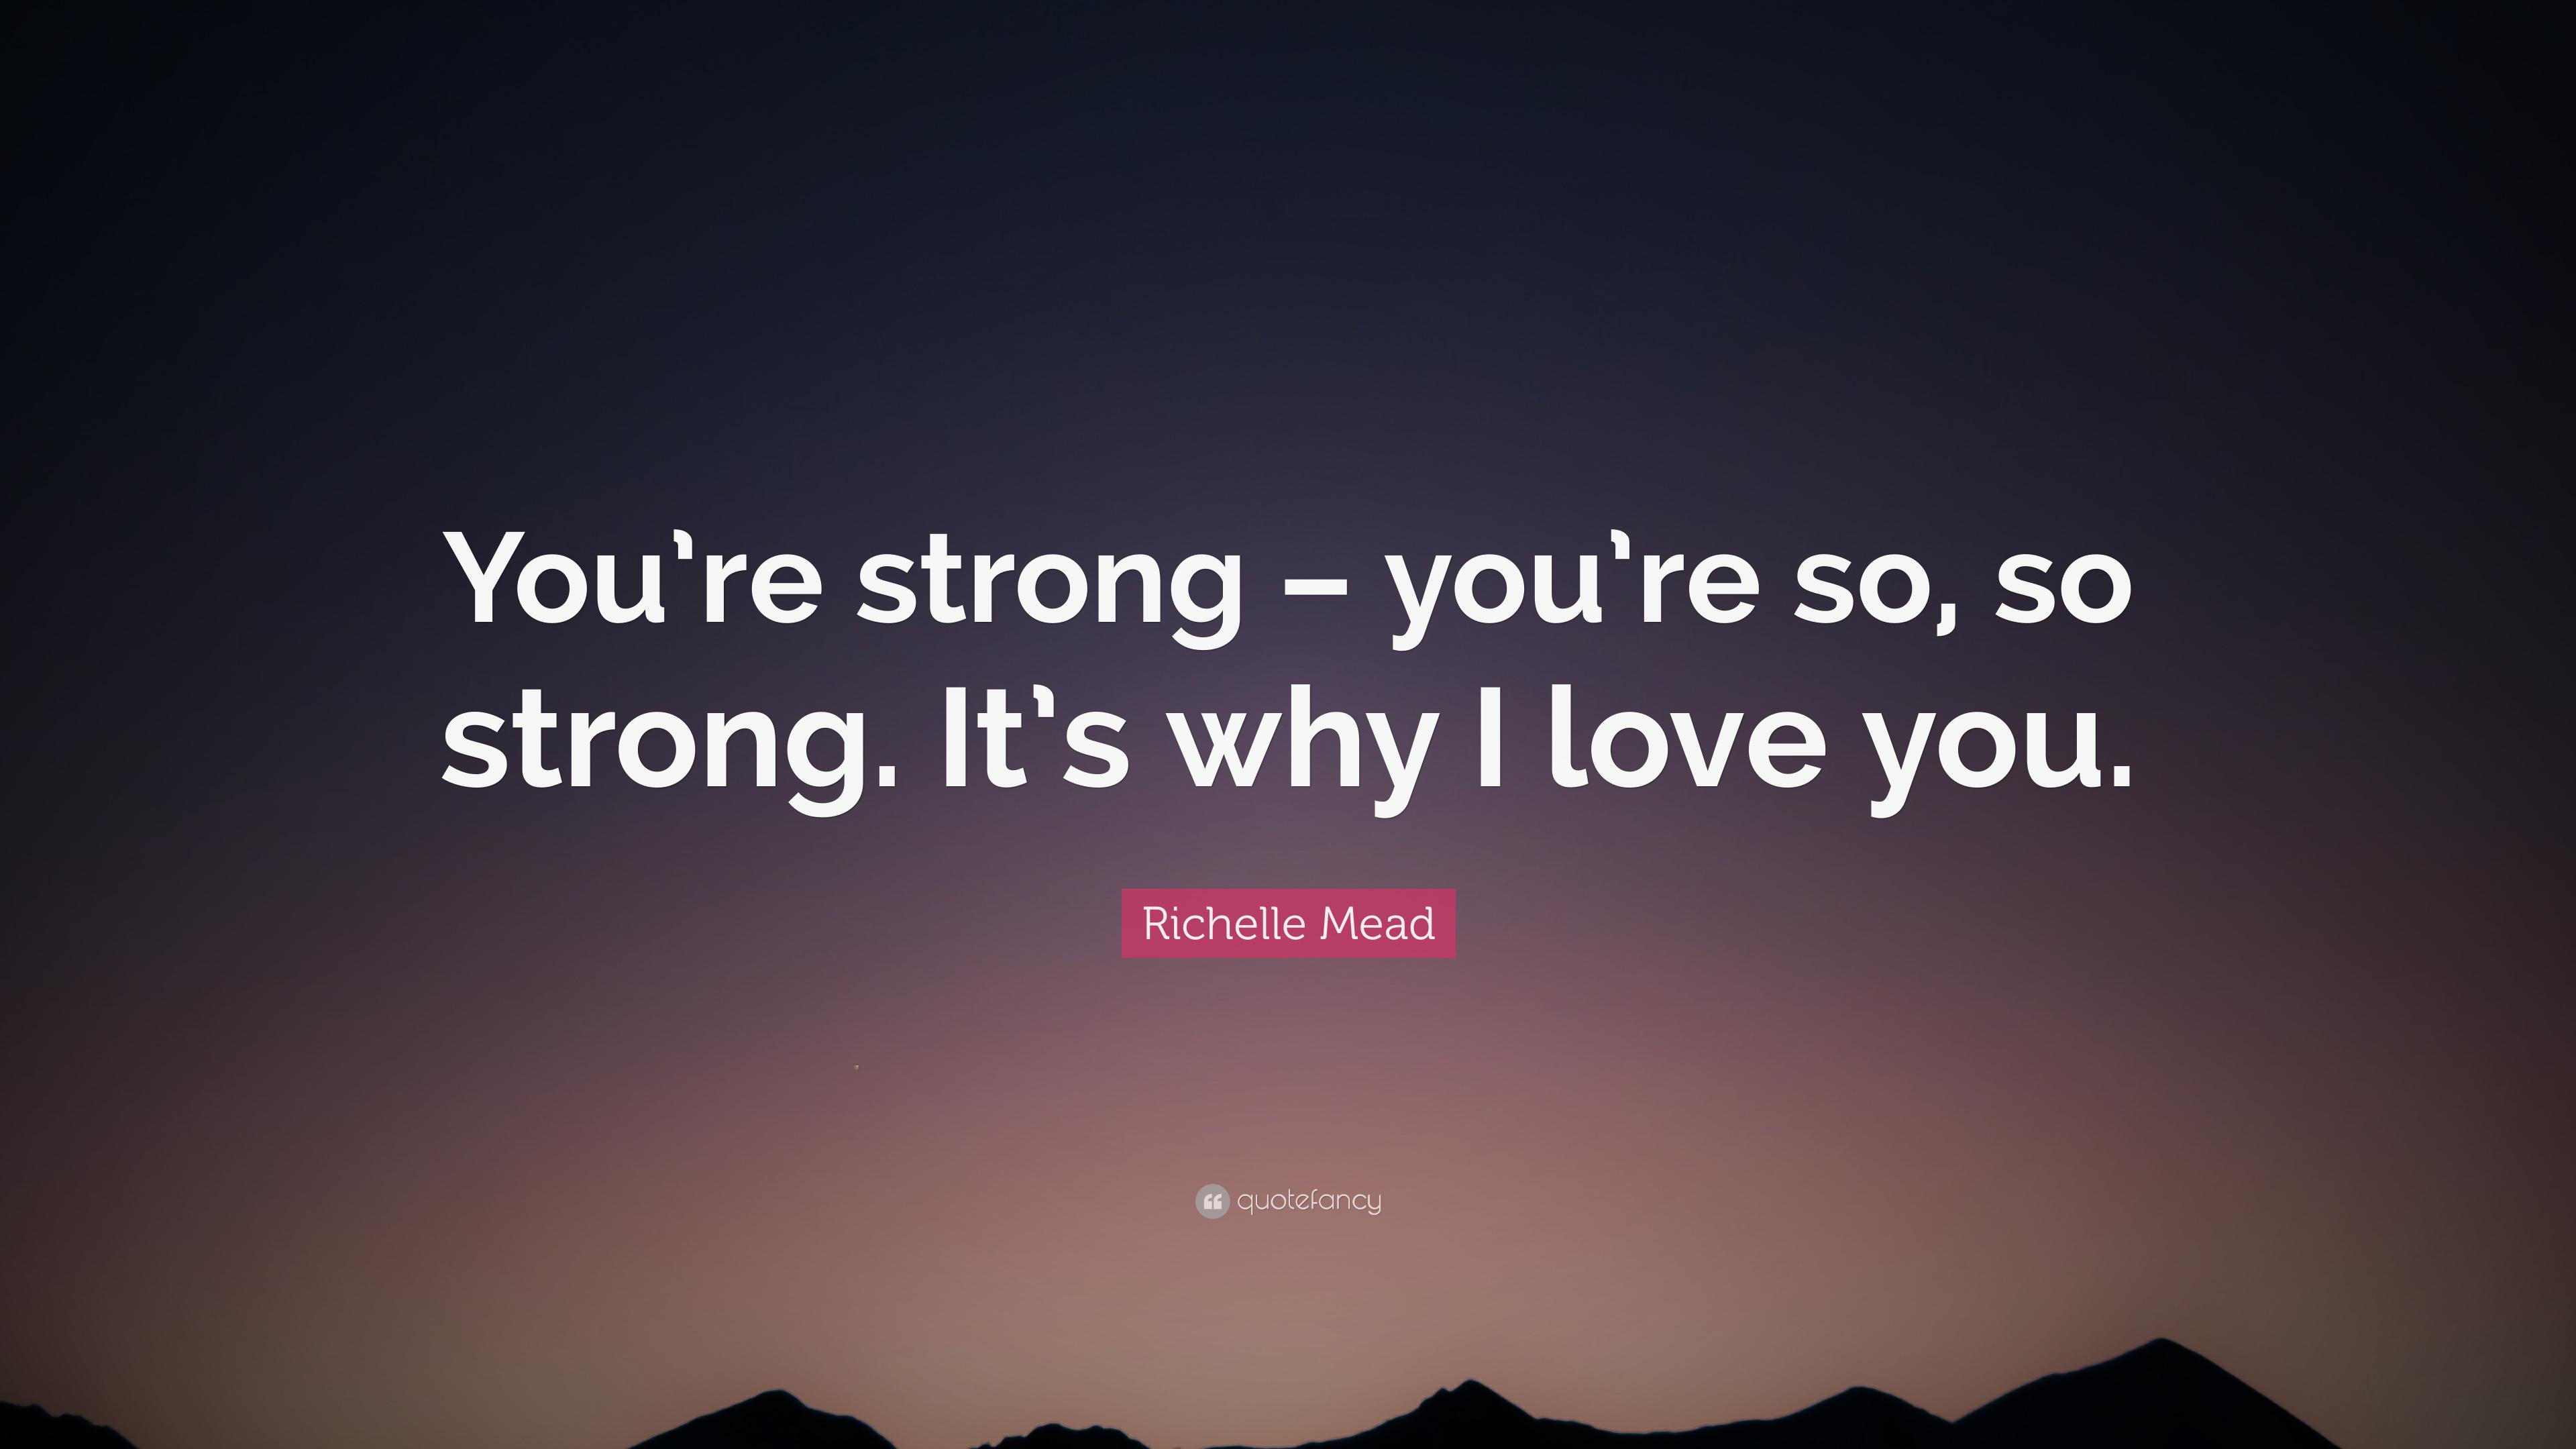 Richelle Mead Quote: “You're strong